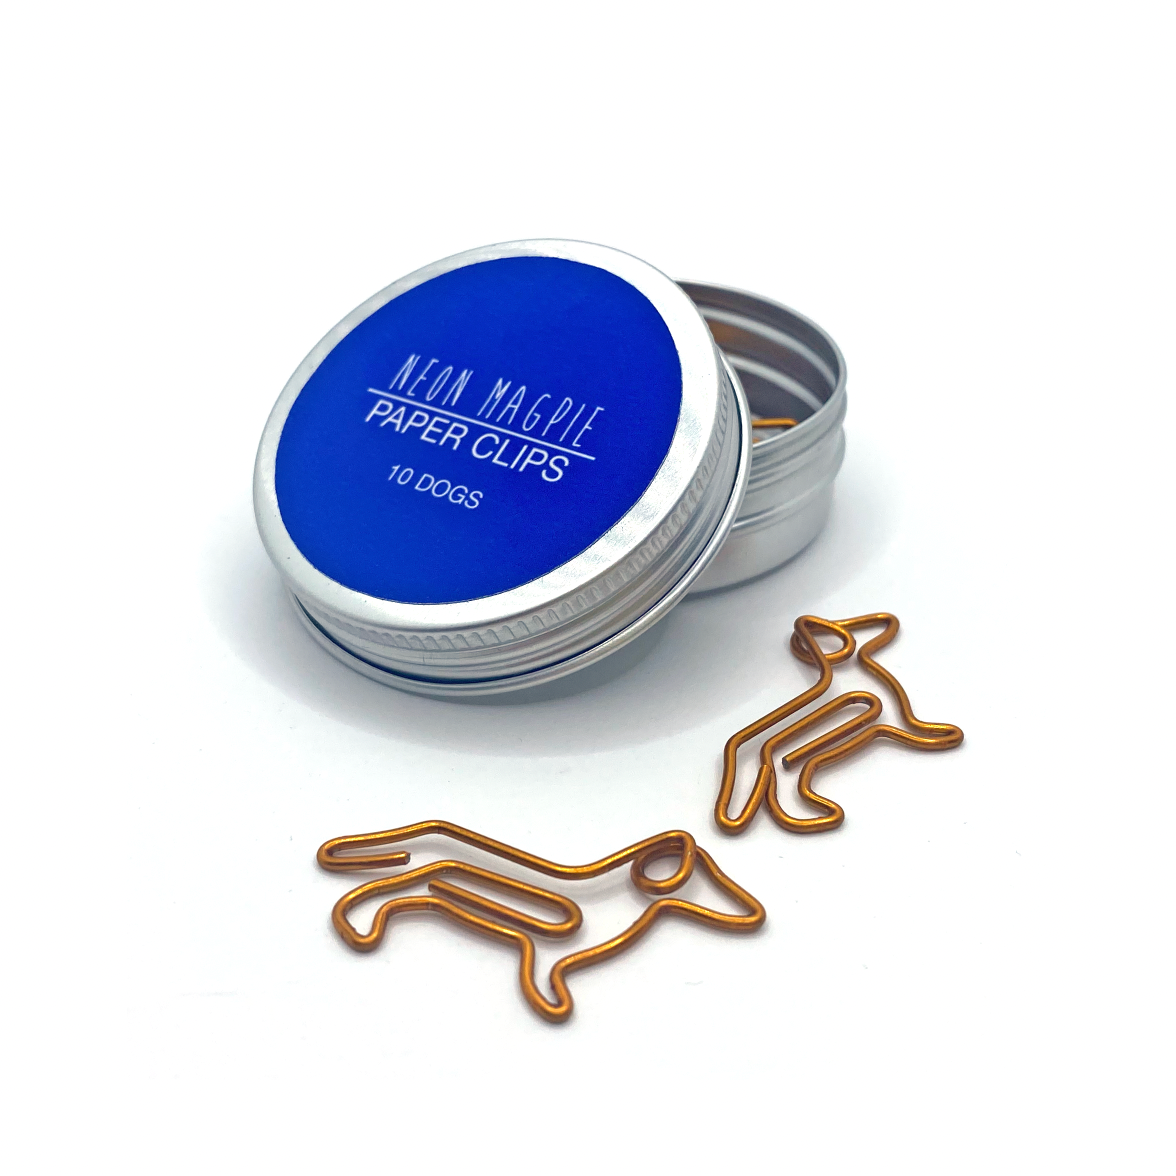 Copper coloured dog shaped paper clips in a silver tin